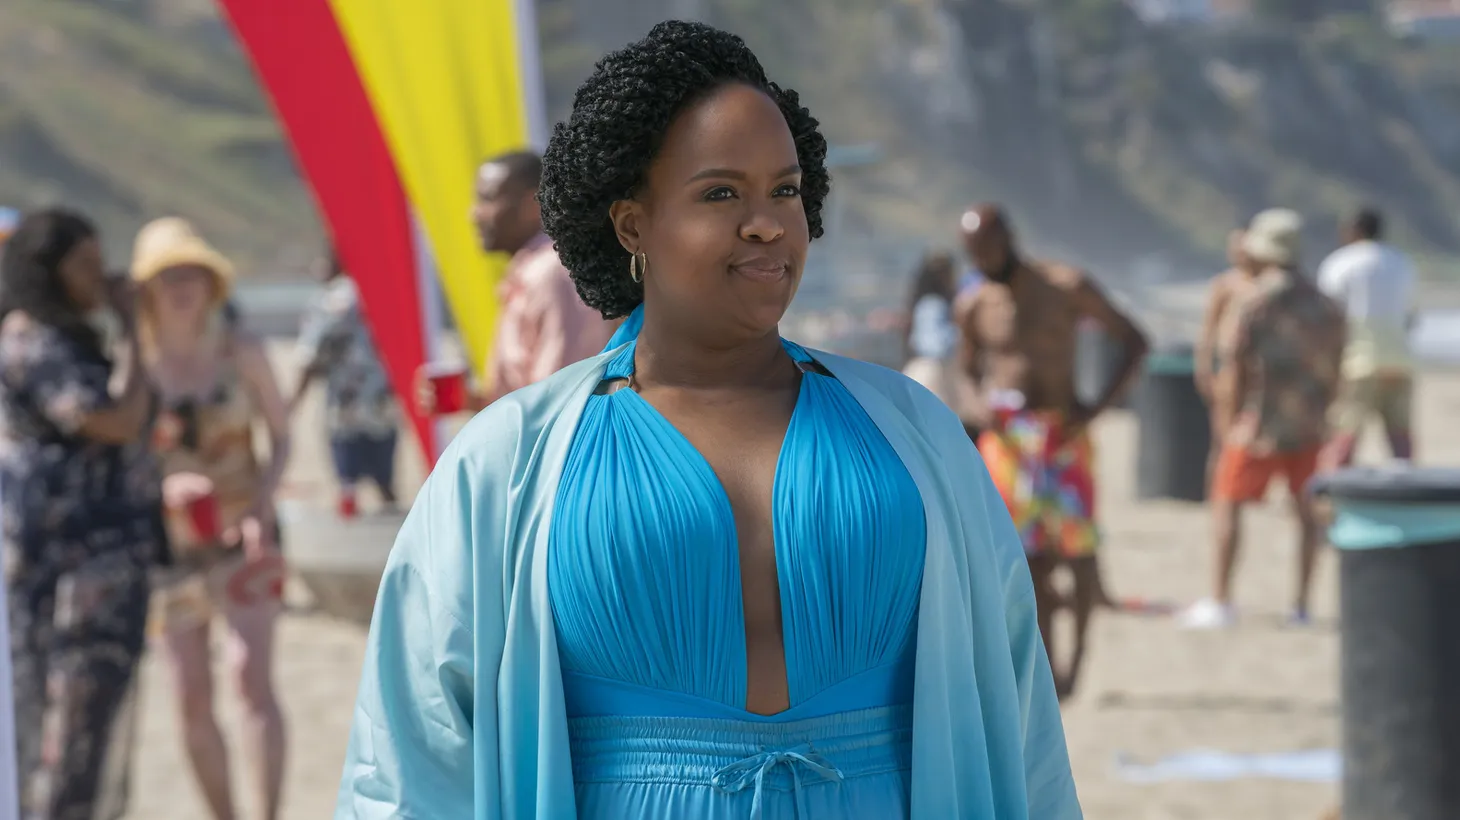 Natasha Rothwell played Kelli on “Insecure” for five seasons, and was also a writer, producer and director on the HBO show.